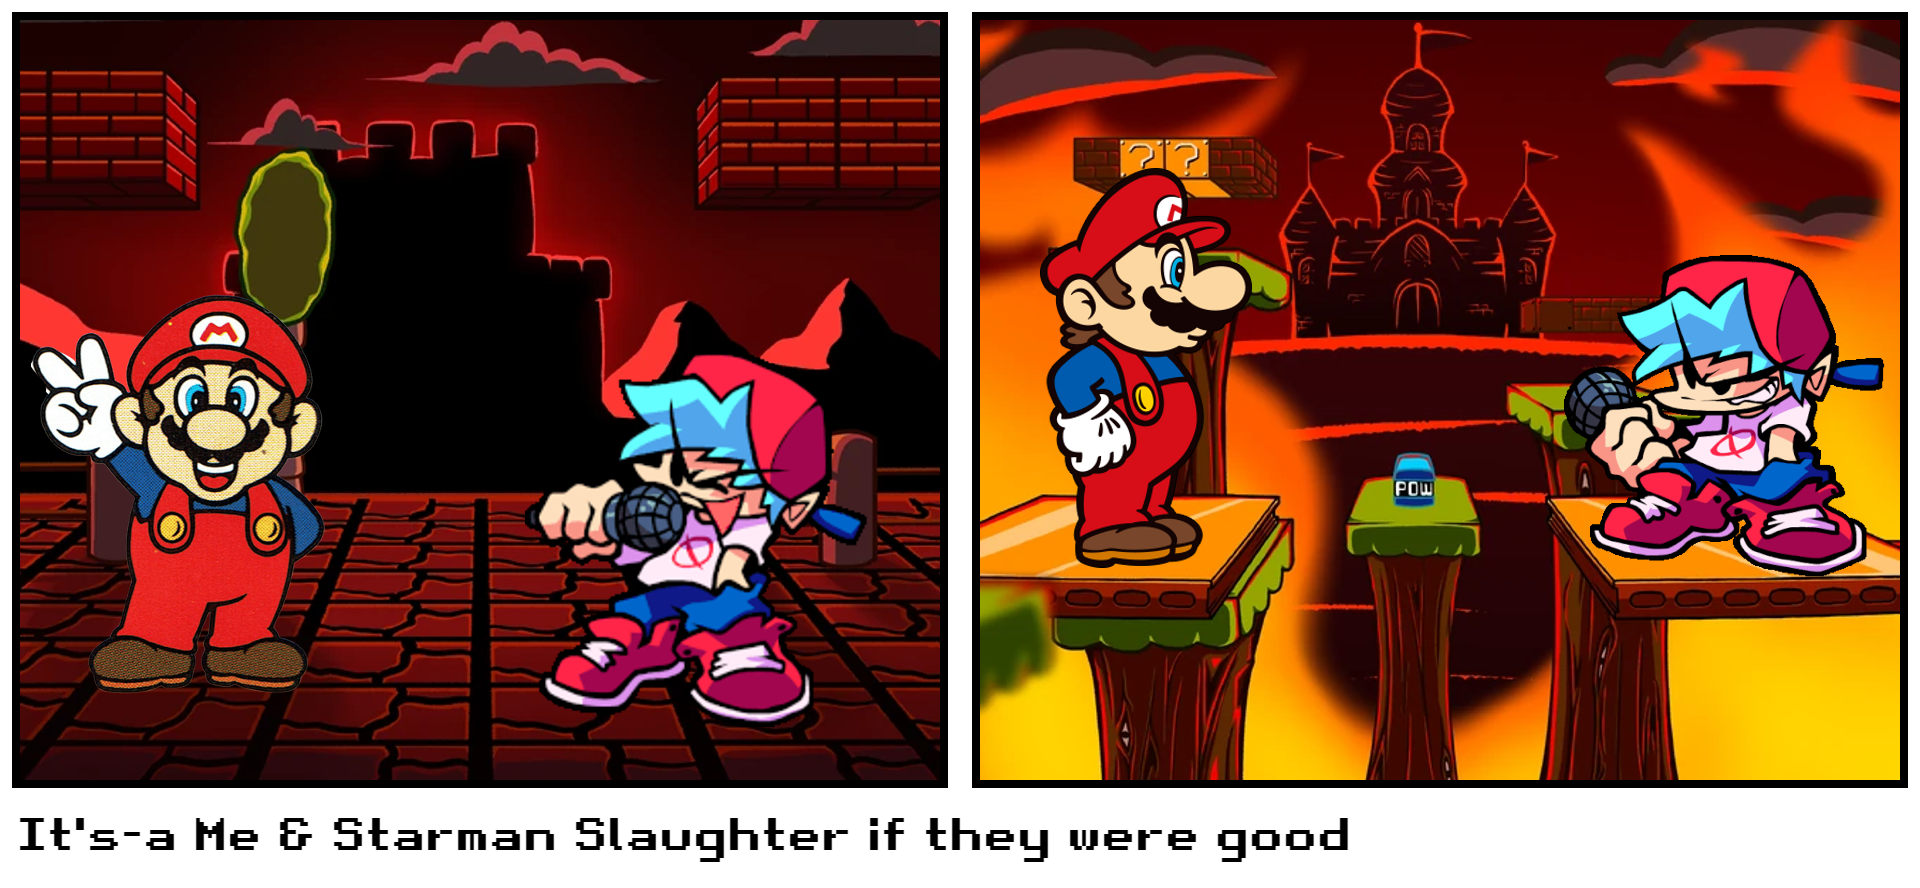 It's-a Me & Starman Slaughter if they were good